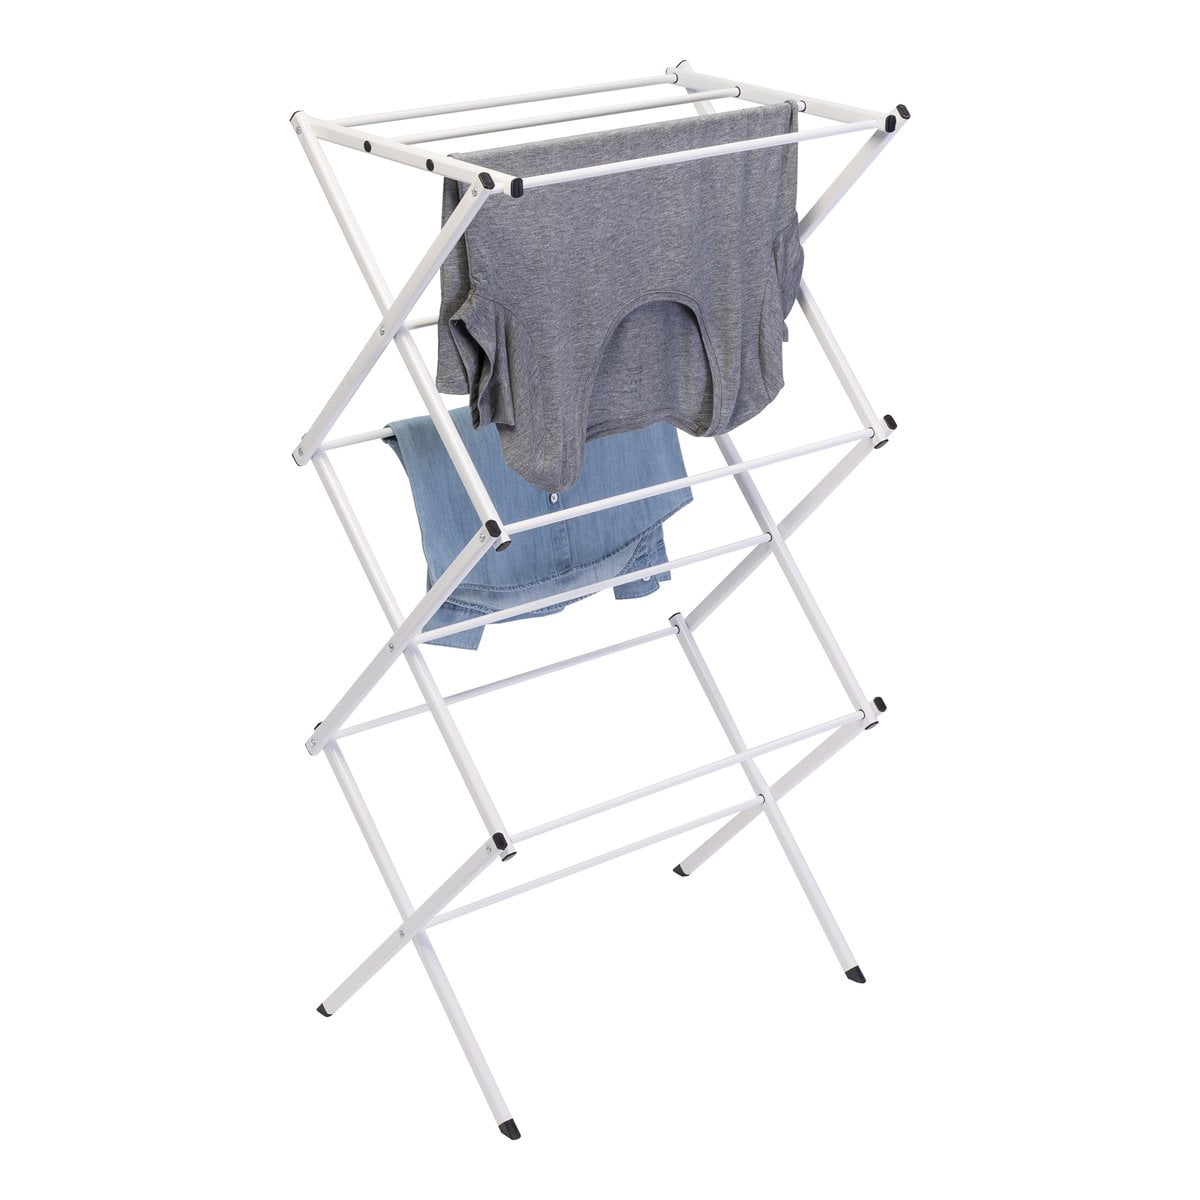  Polder Compact Accordion Clothes Drying Rack, Air-Dry Clothes  and Gear, Preserve Delicates, Folds Compact for Easy Storage, White - Dryer  Rack